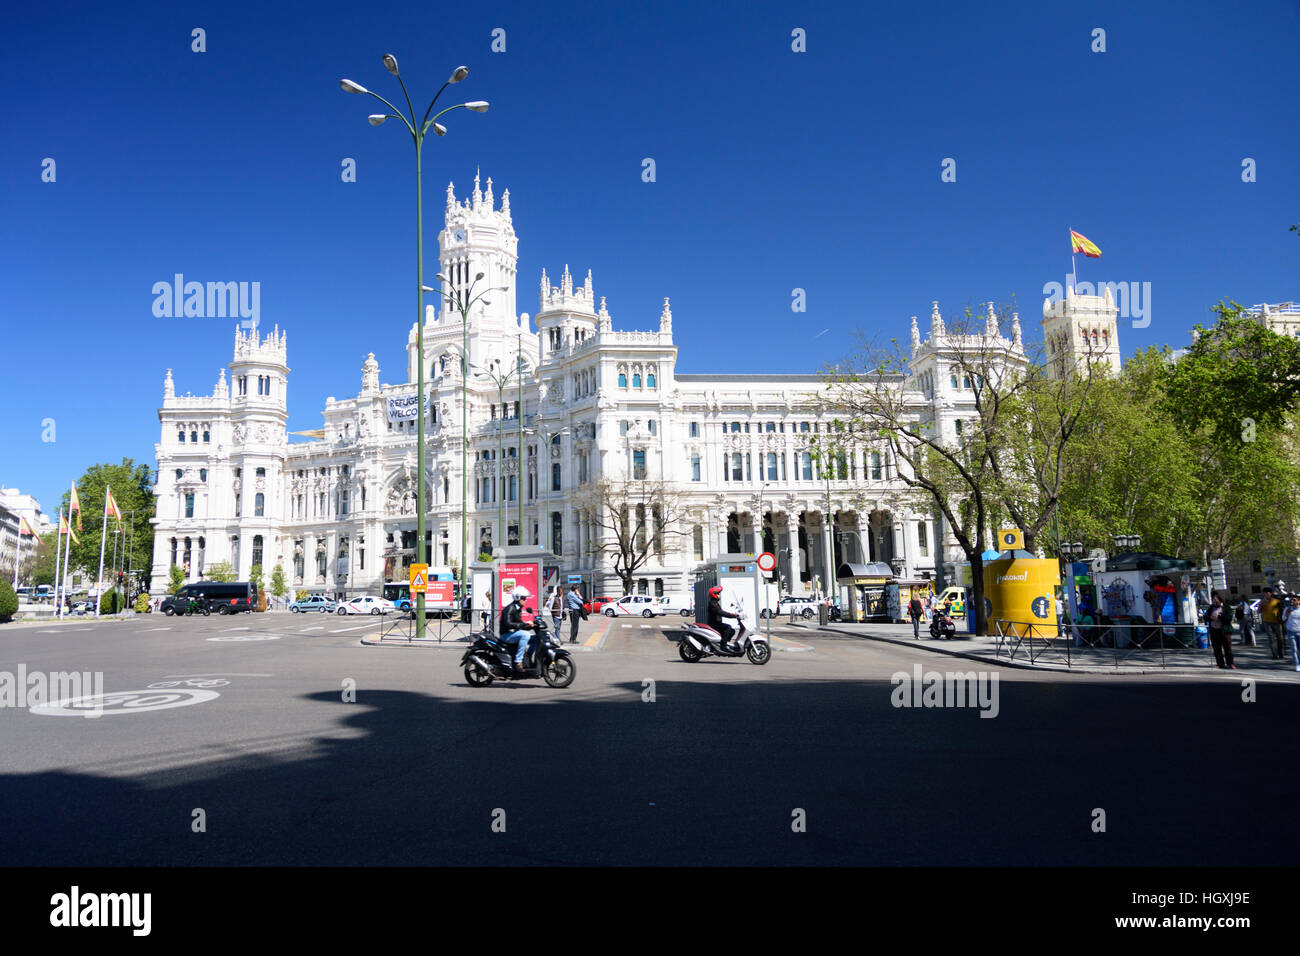 Madrid, Spain. The City Council at Plaza de Cibeles with a banner with text 'Refugees welcome'. Stock Photo